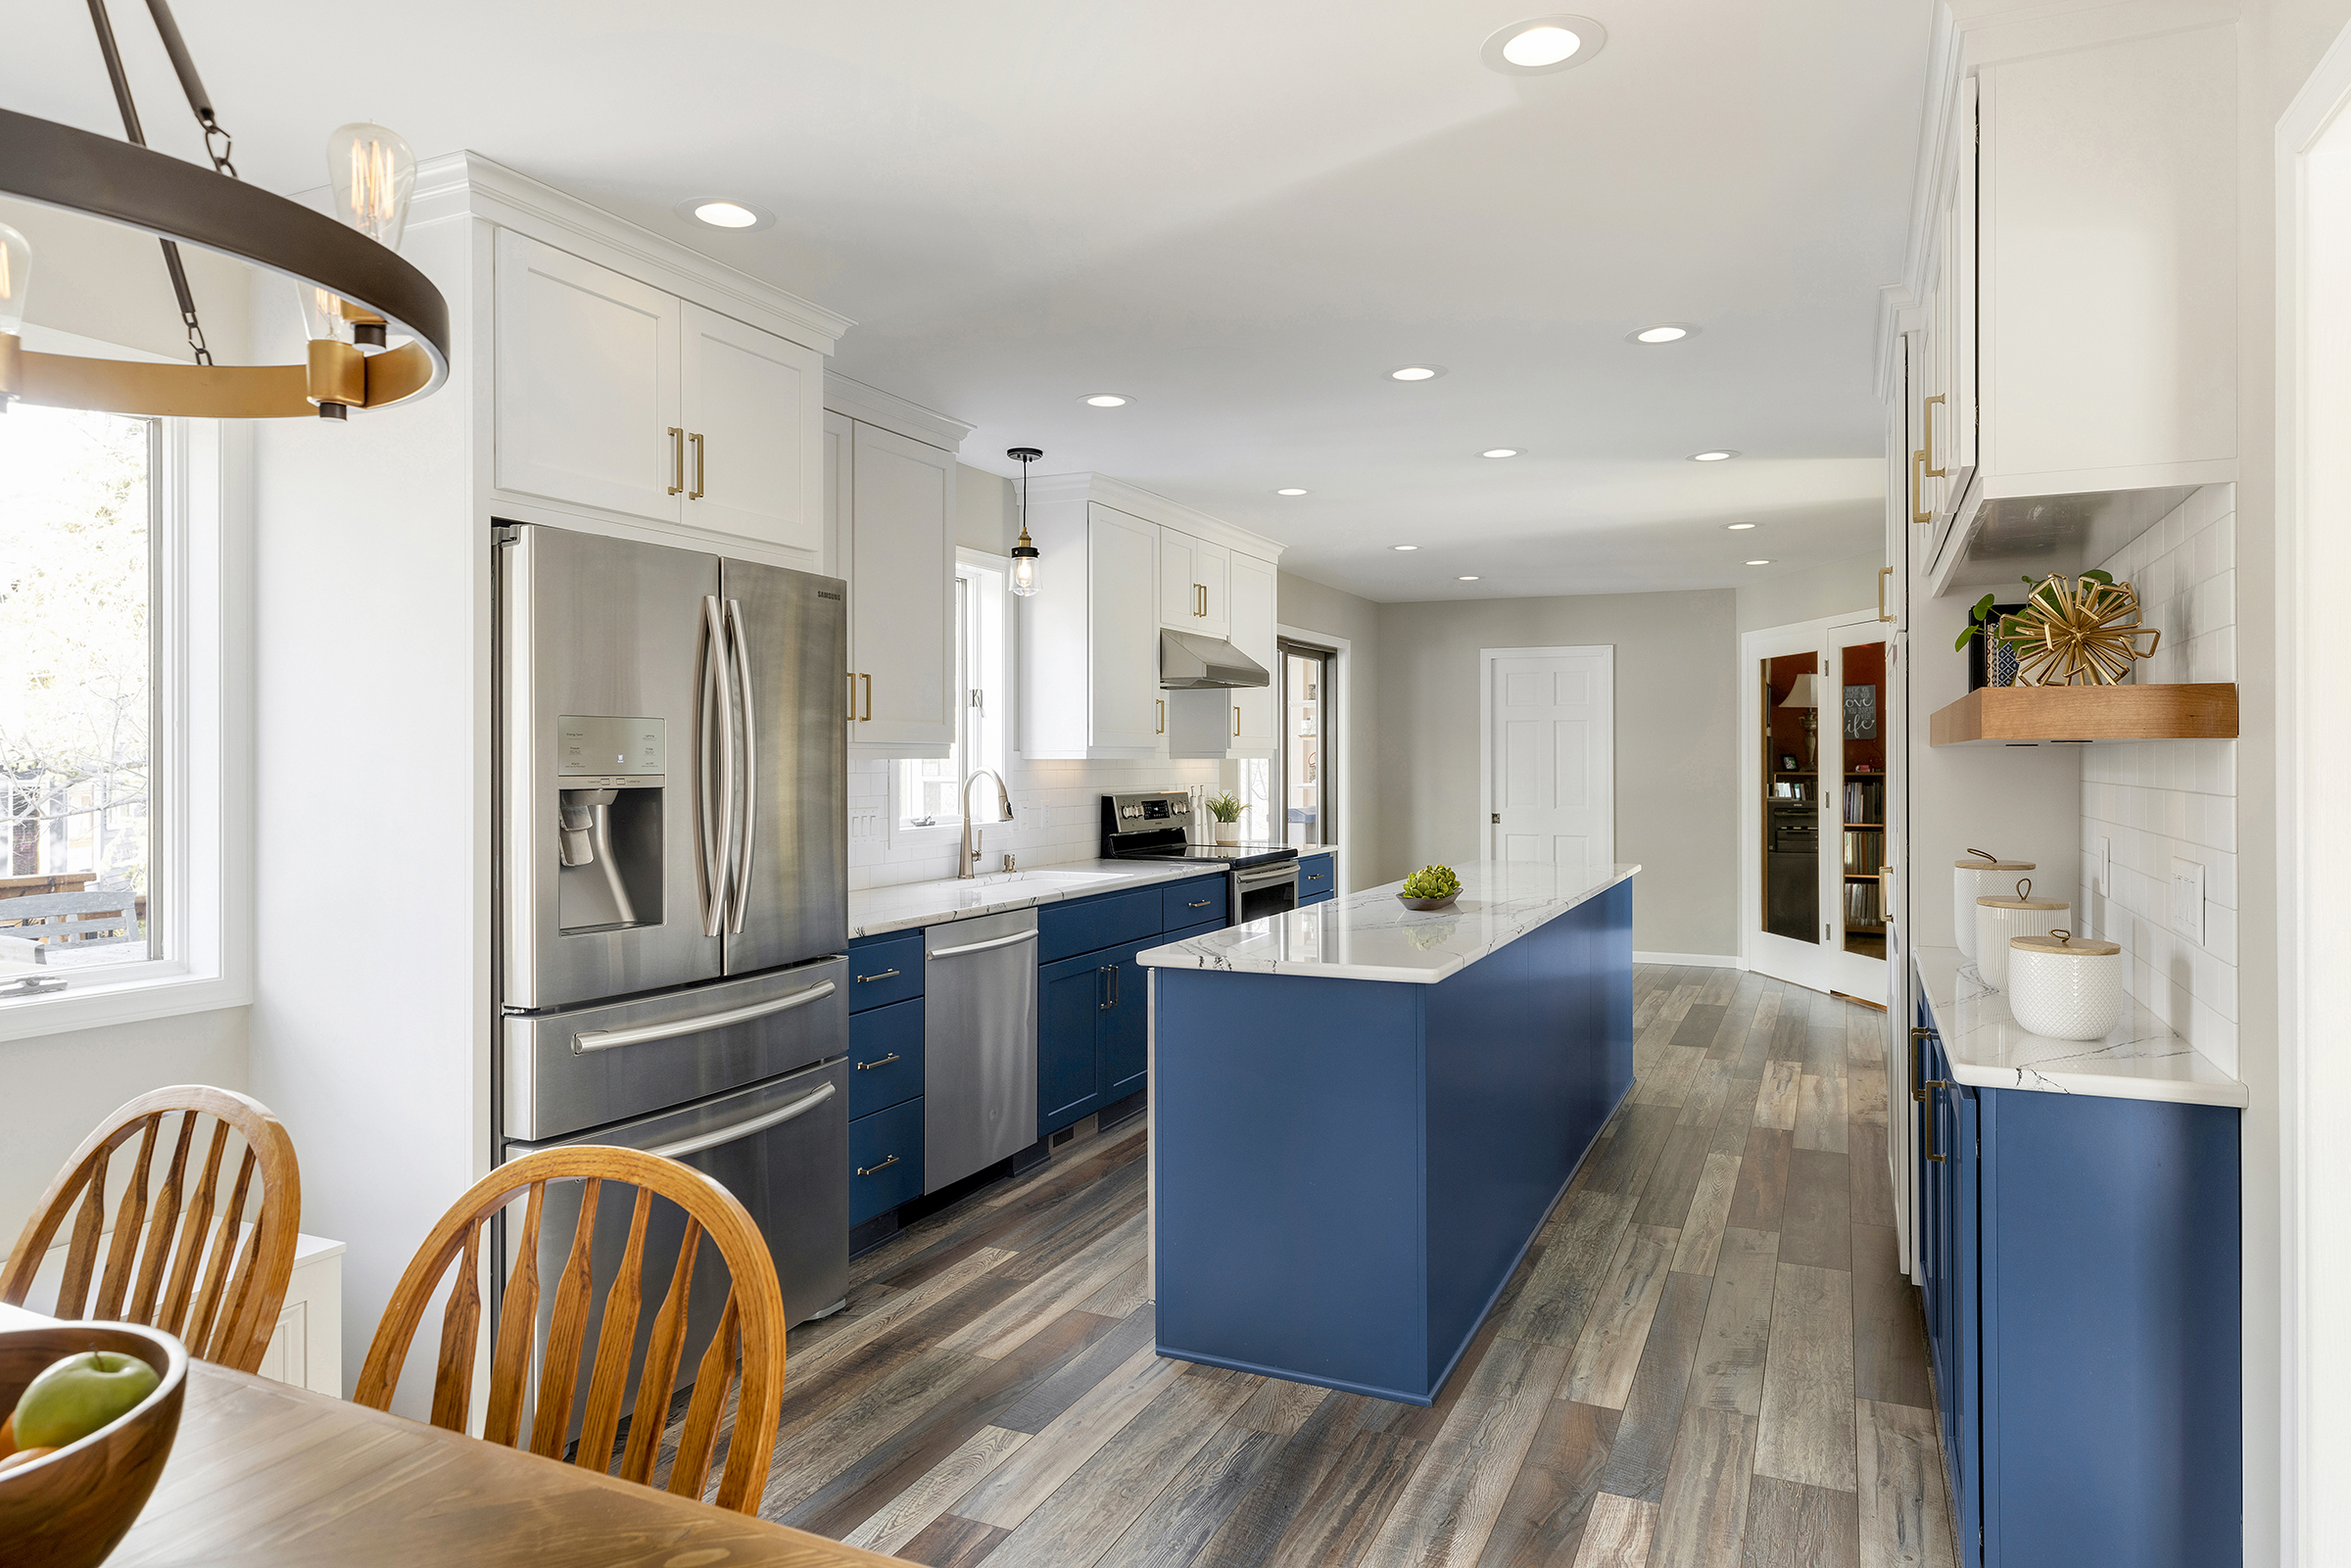 Remodeled kitchen with blue base cabinets, large island, brick wall, and gold fixtures